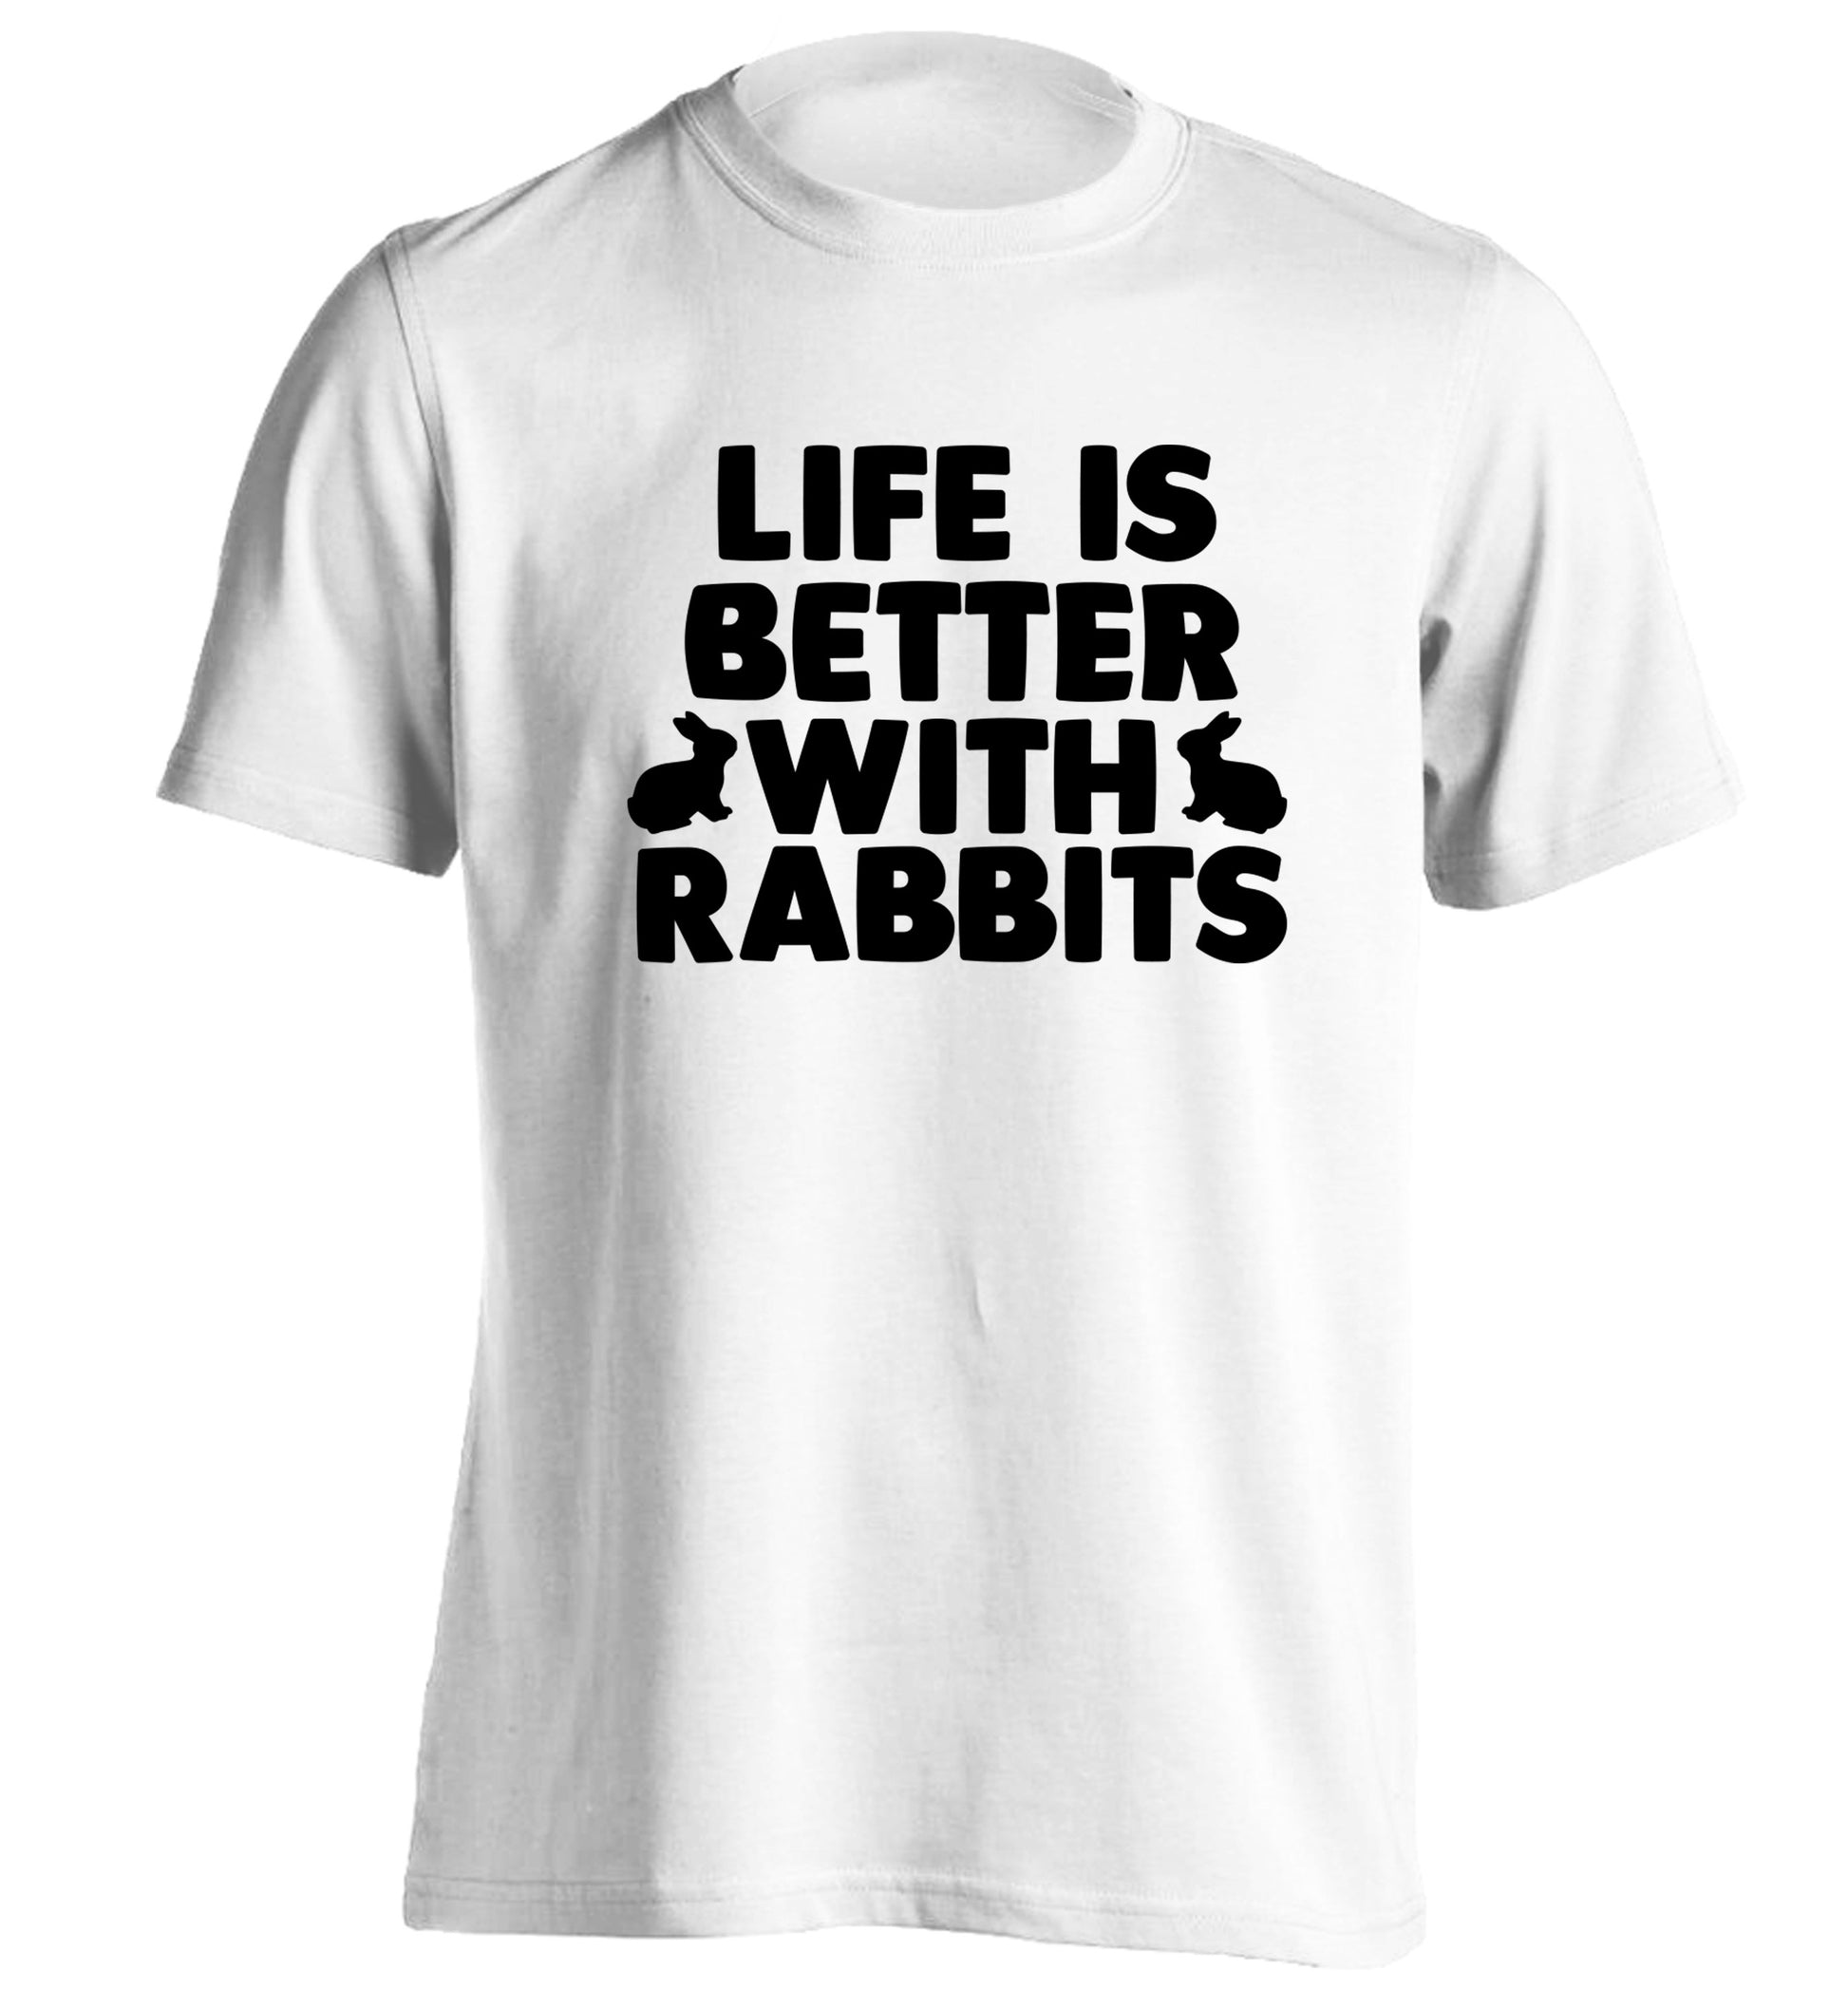 Life is better with rabbits adults unisex white Tshirt 2XL